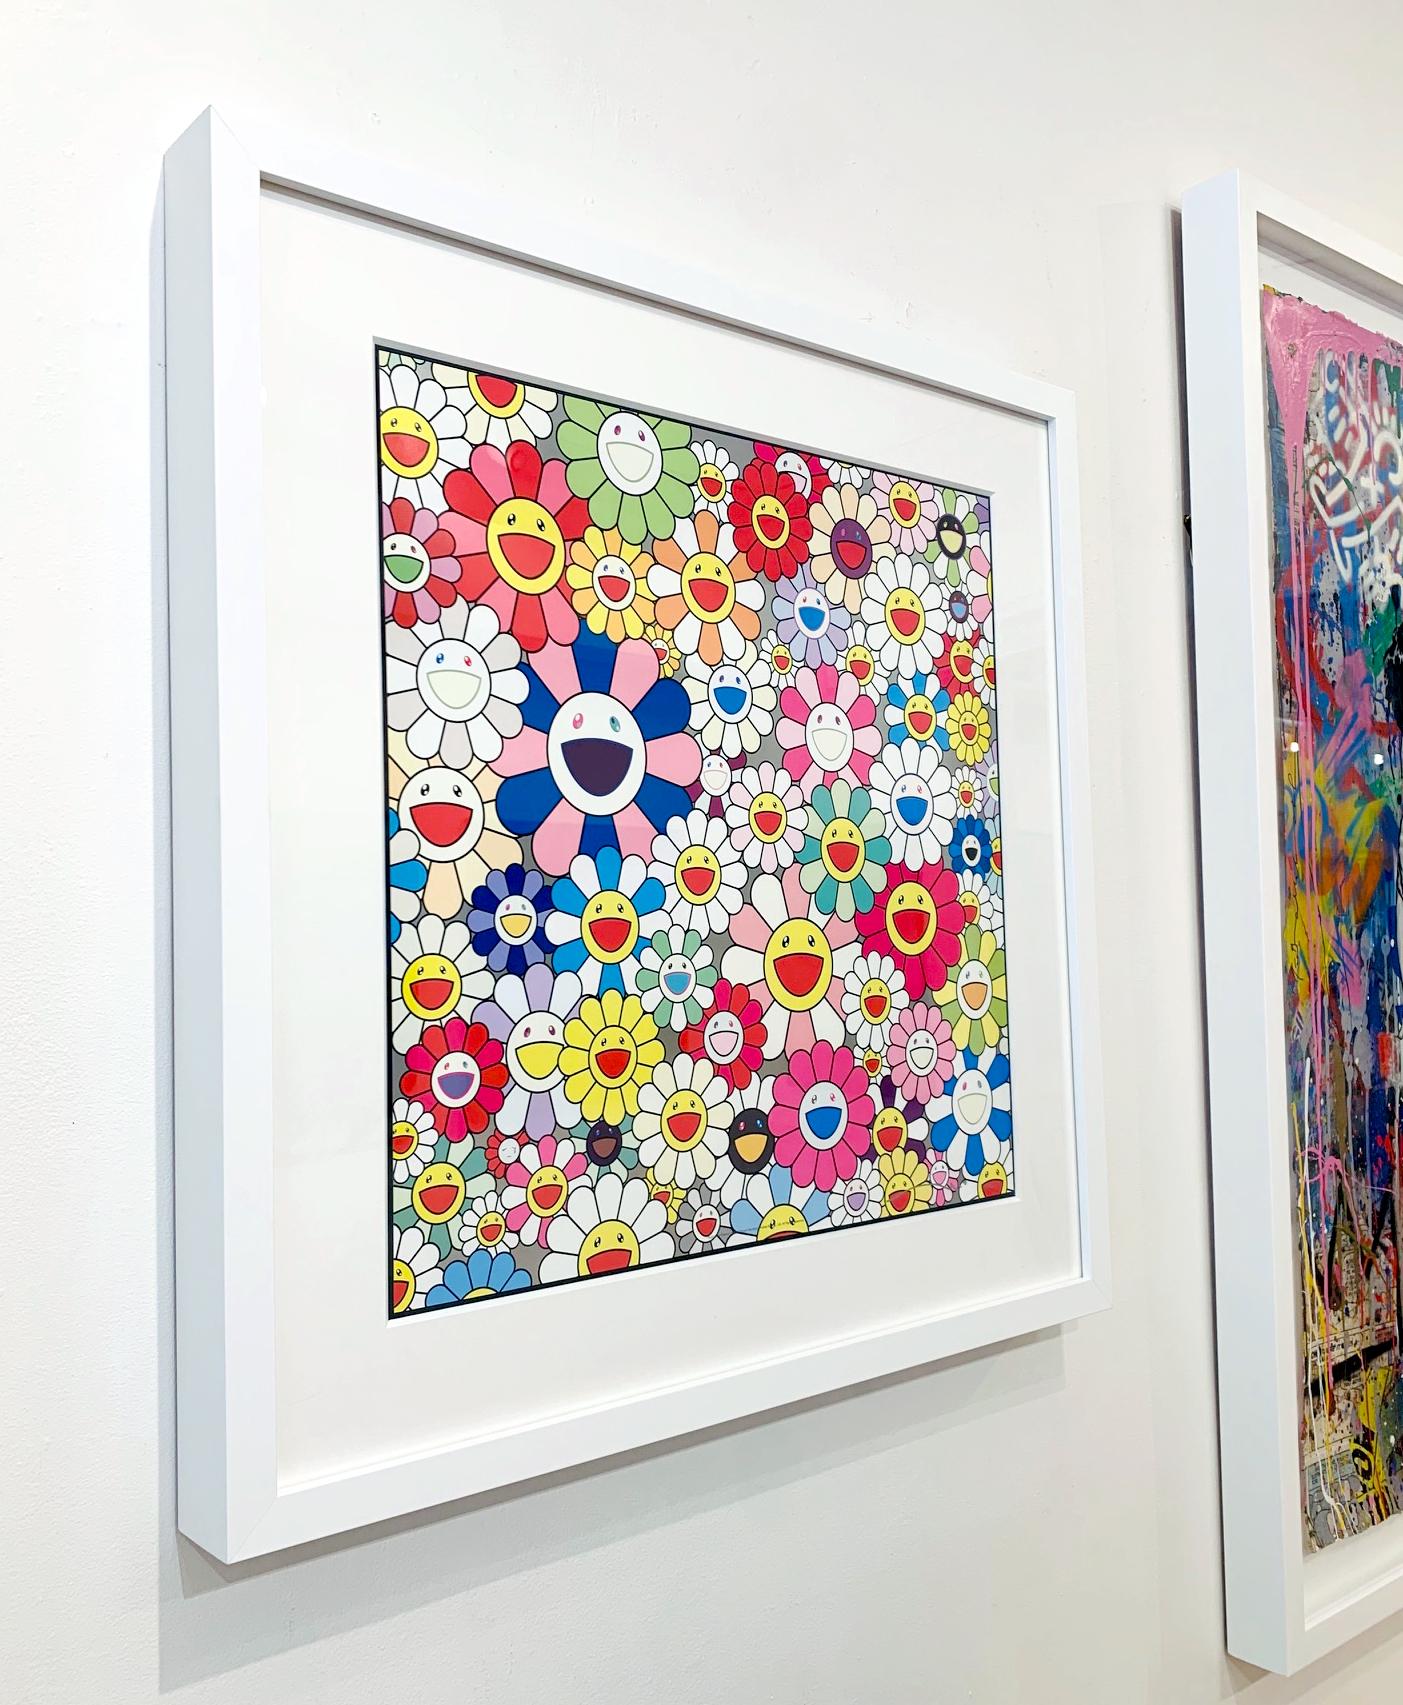 Artist:  Murakami, Takashi
Title:  Such Cute Flowers 
Date:  2011
Medium:  Offset-lithograph with cold-stamping 
Unframed Dimensions:  19.75